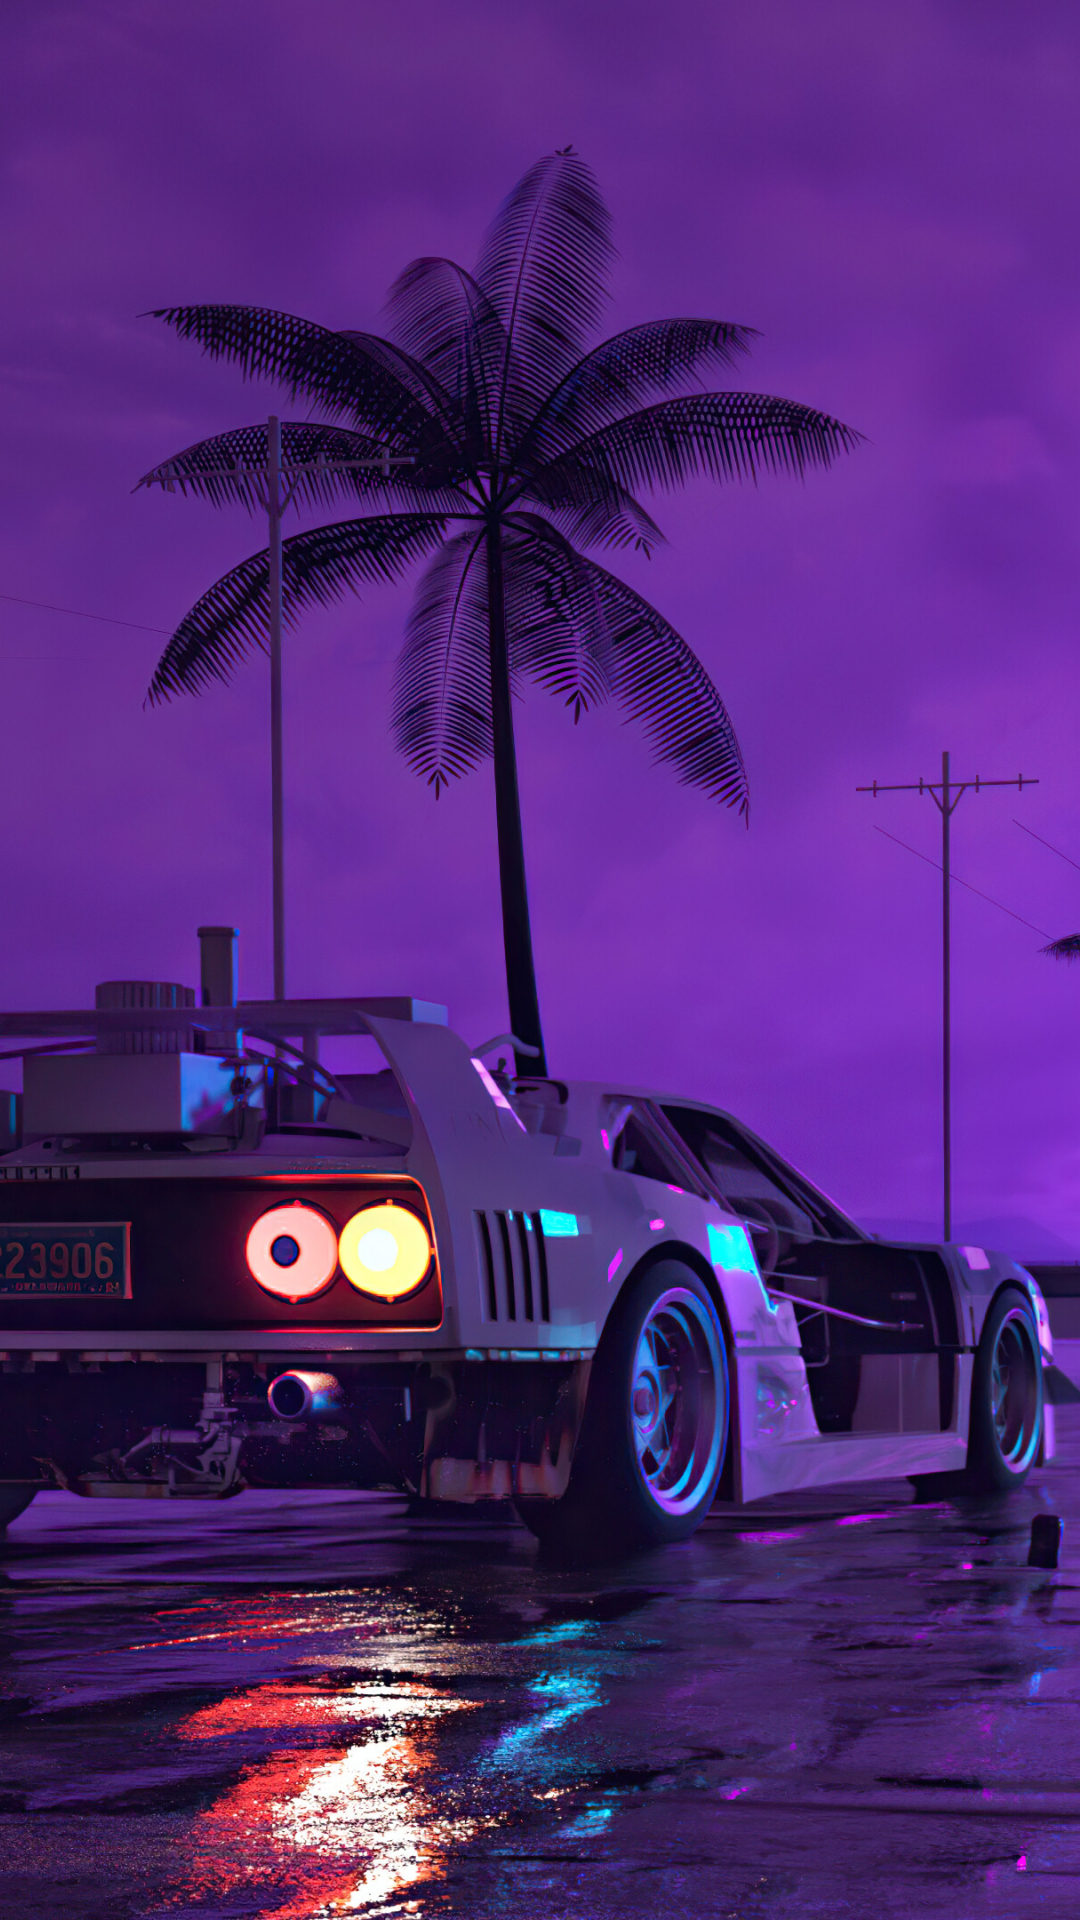 1080x1920 Retro Wave Sunset and Running Car Iphone 7, 6s, 6 Plus and